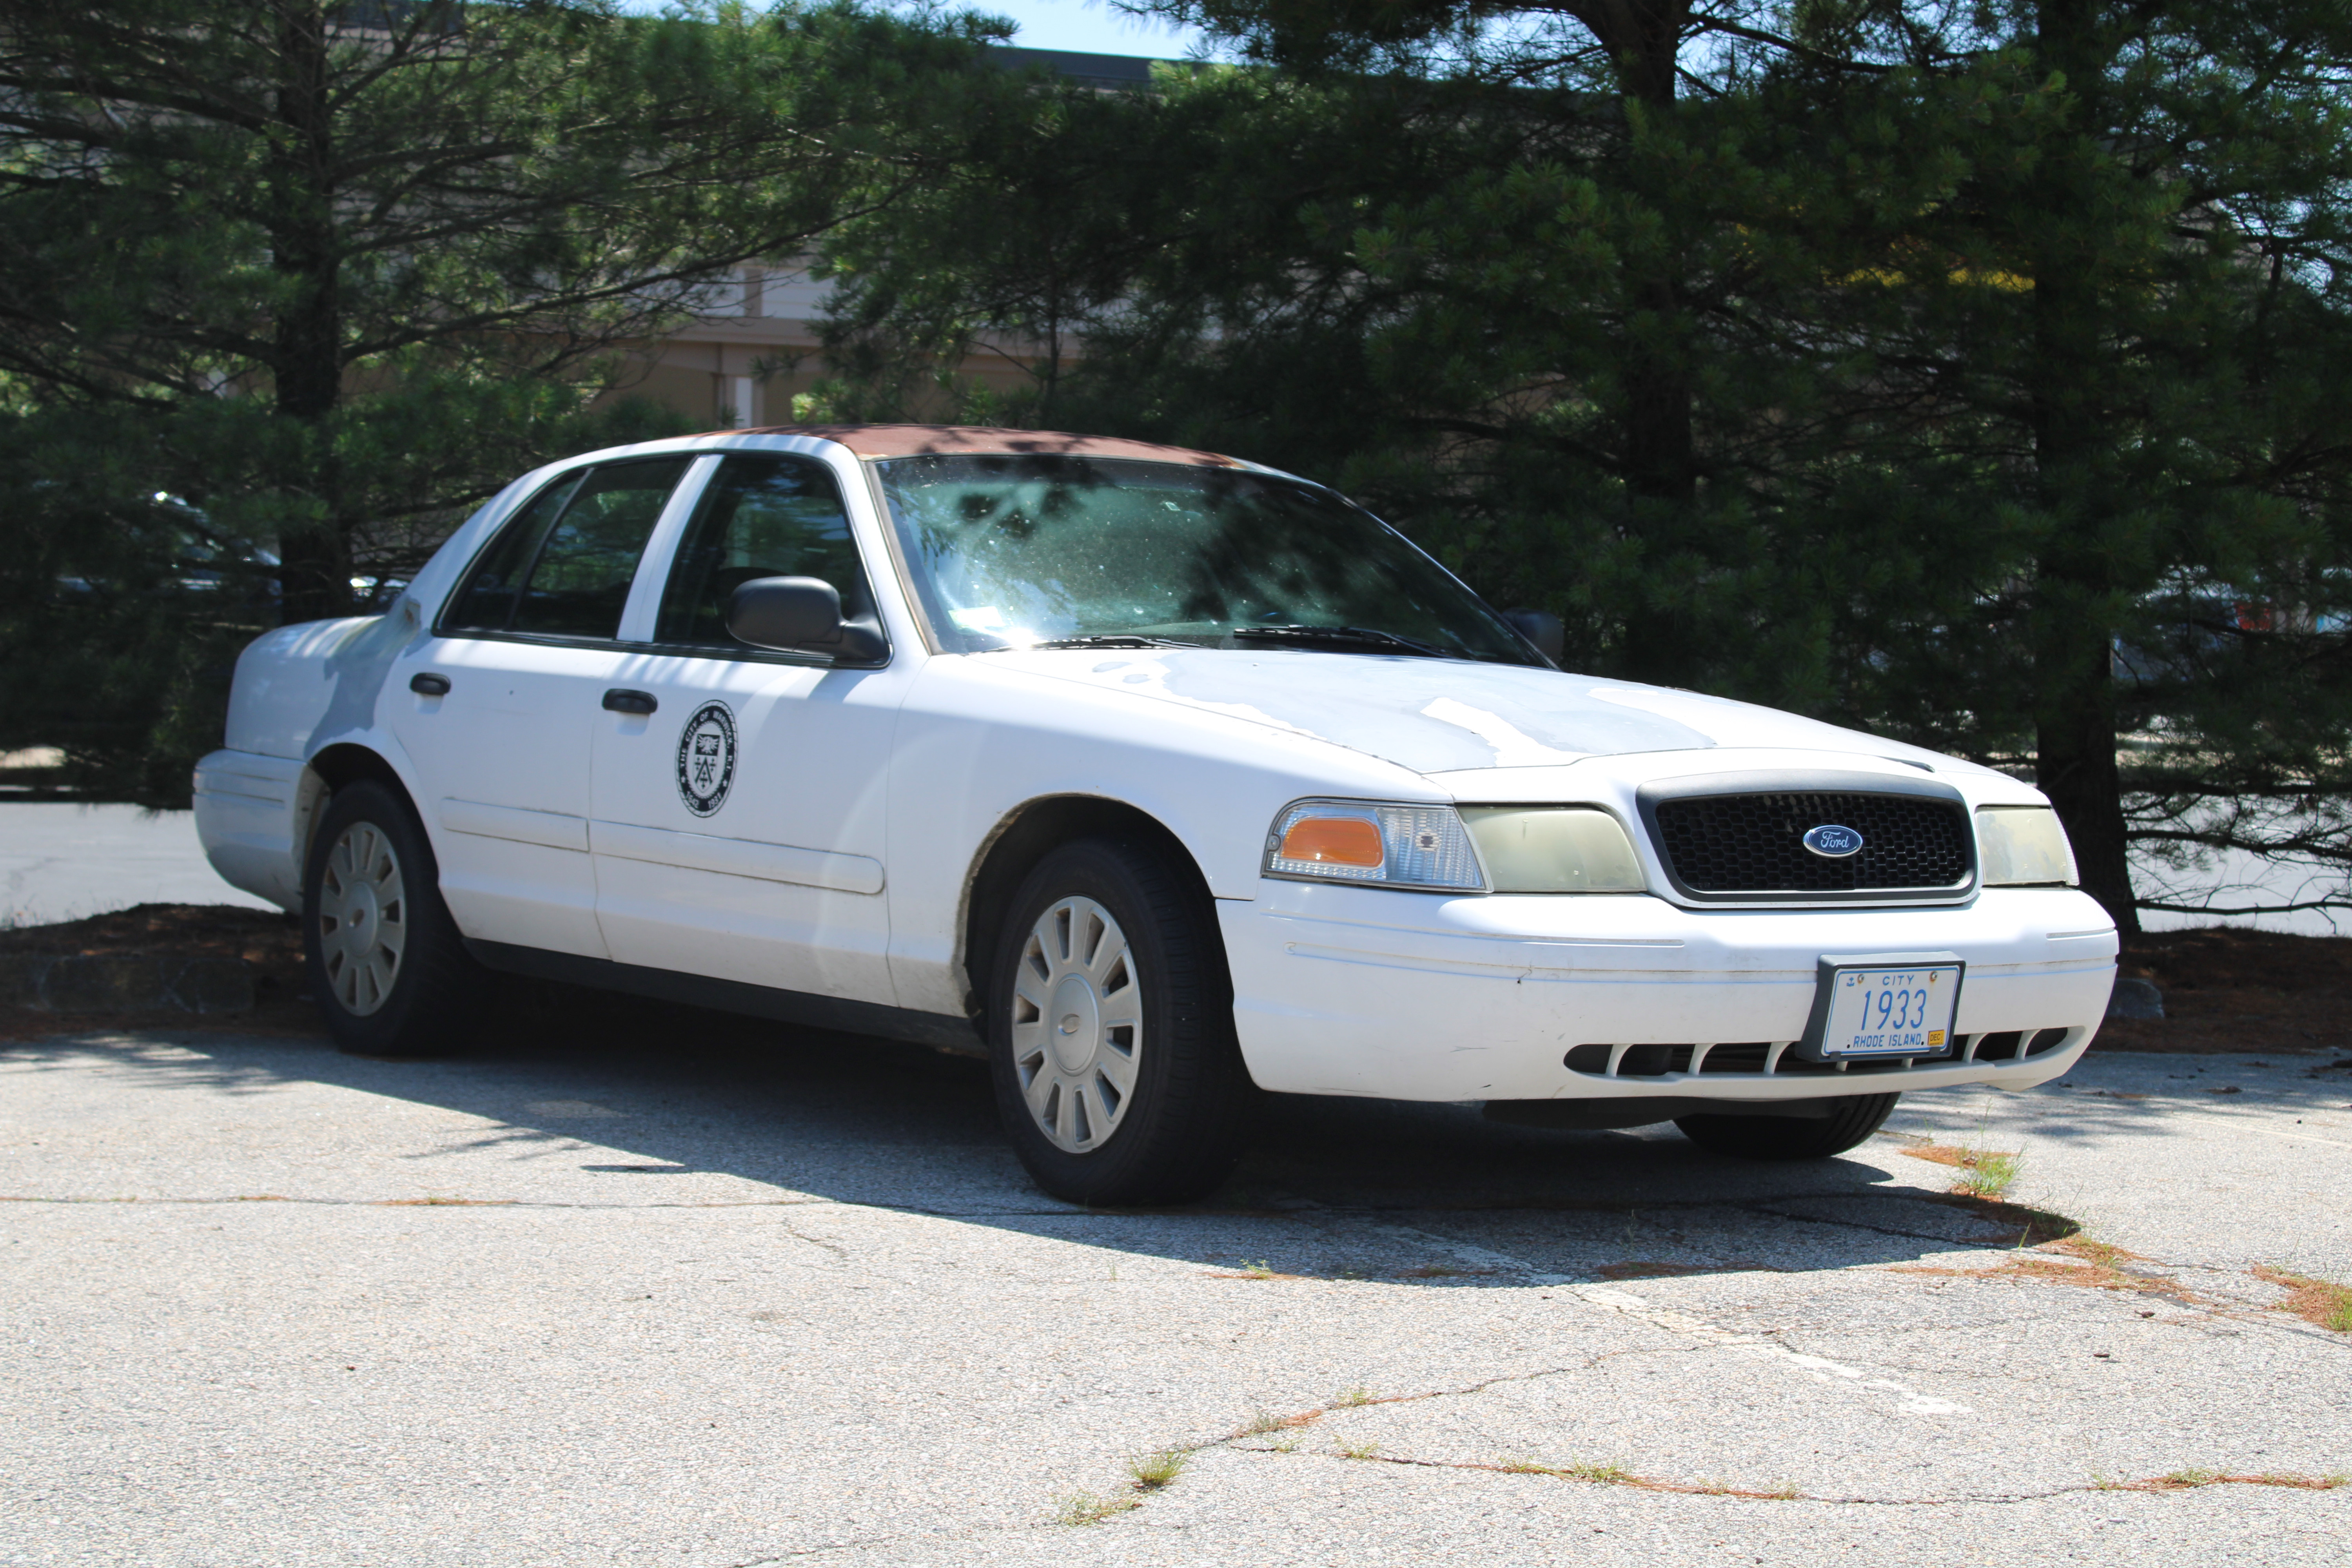 A photo  of Warwick Public Works
            Car 1933, a 2006-2008 Ford Crown Victoria Police Interceptor             taken by @riemergencyvehicles